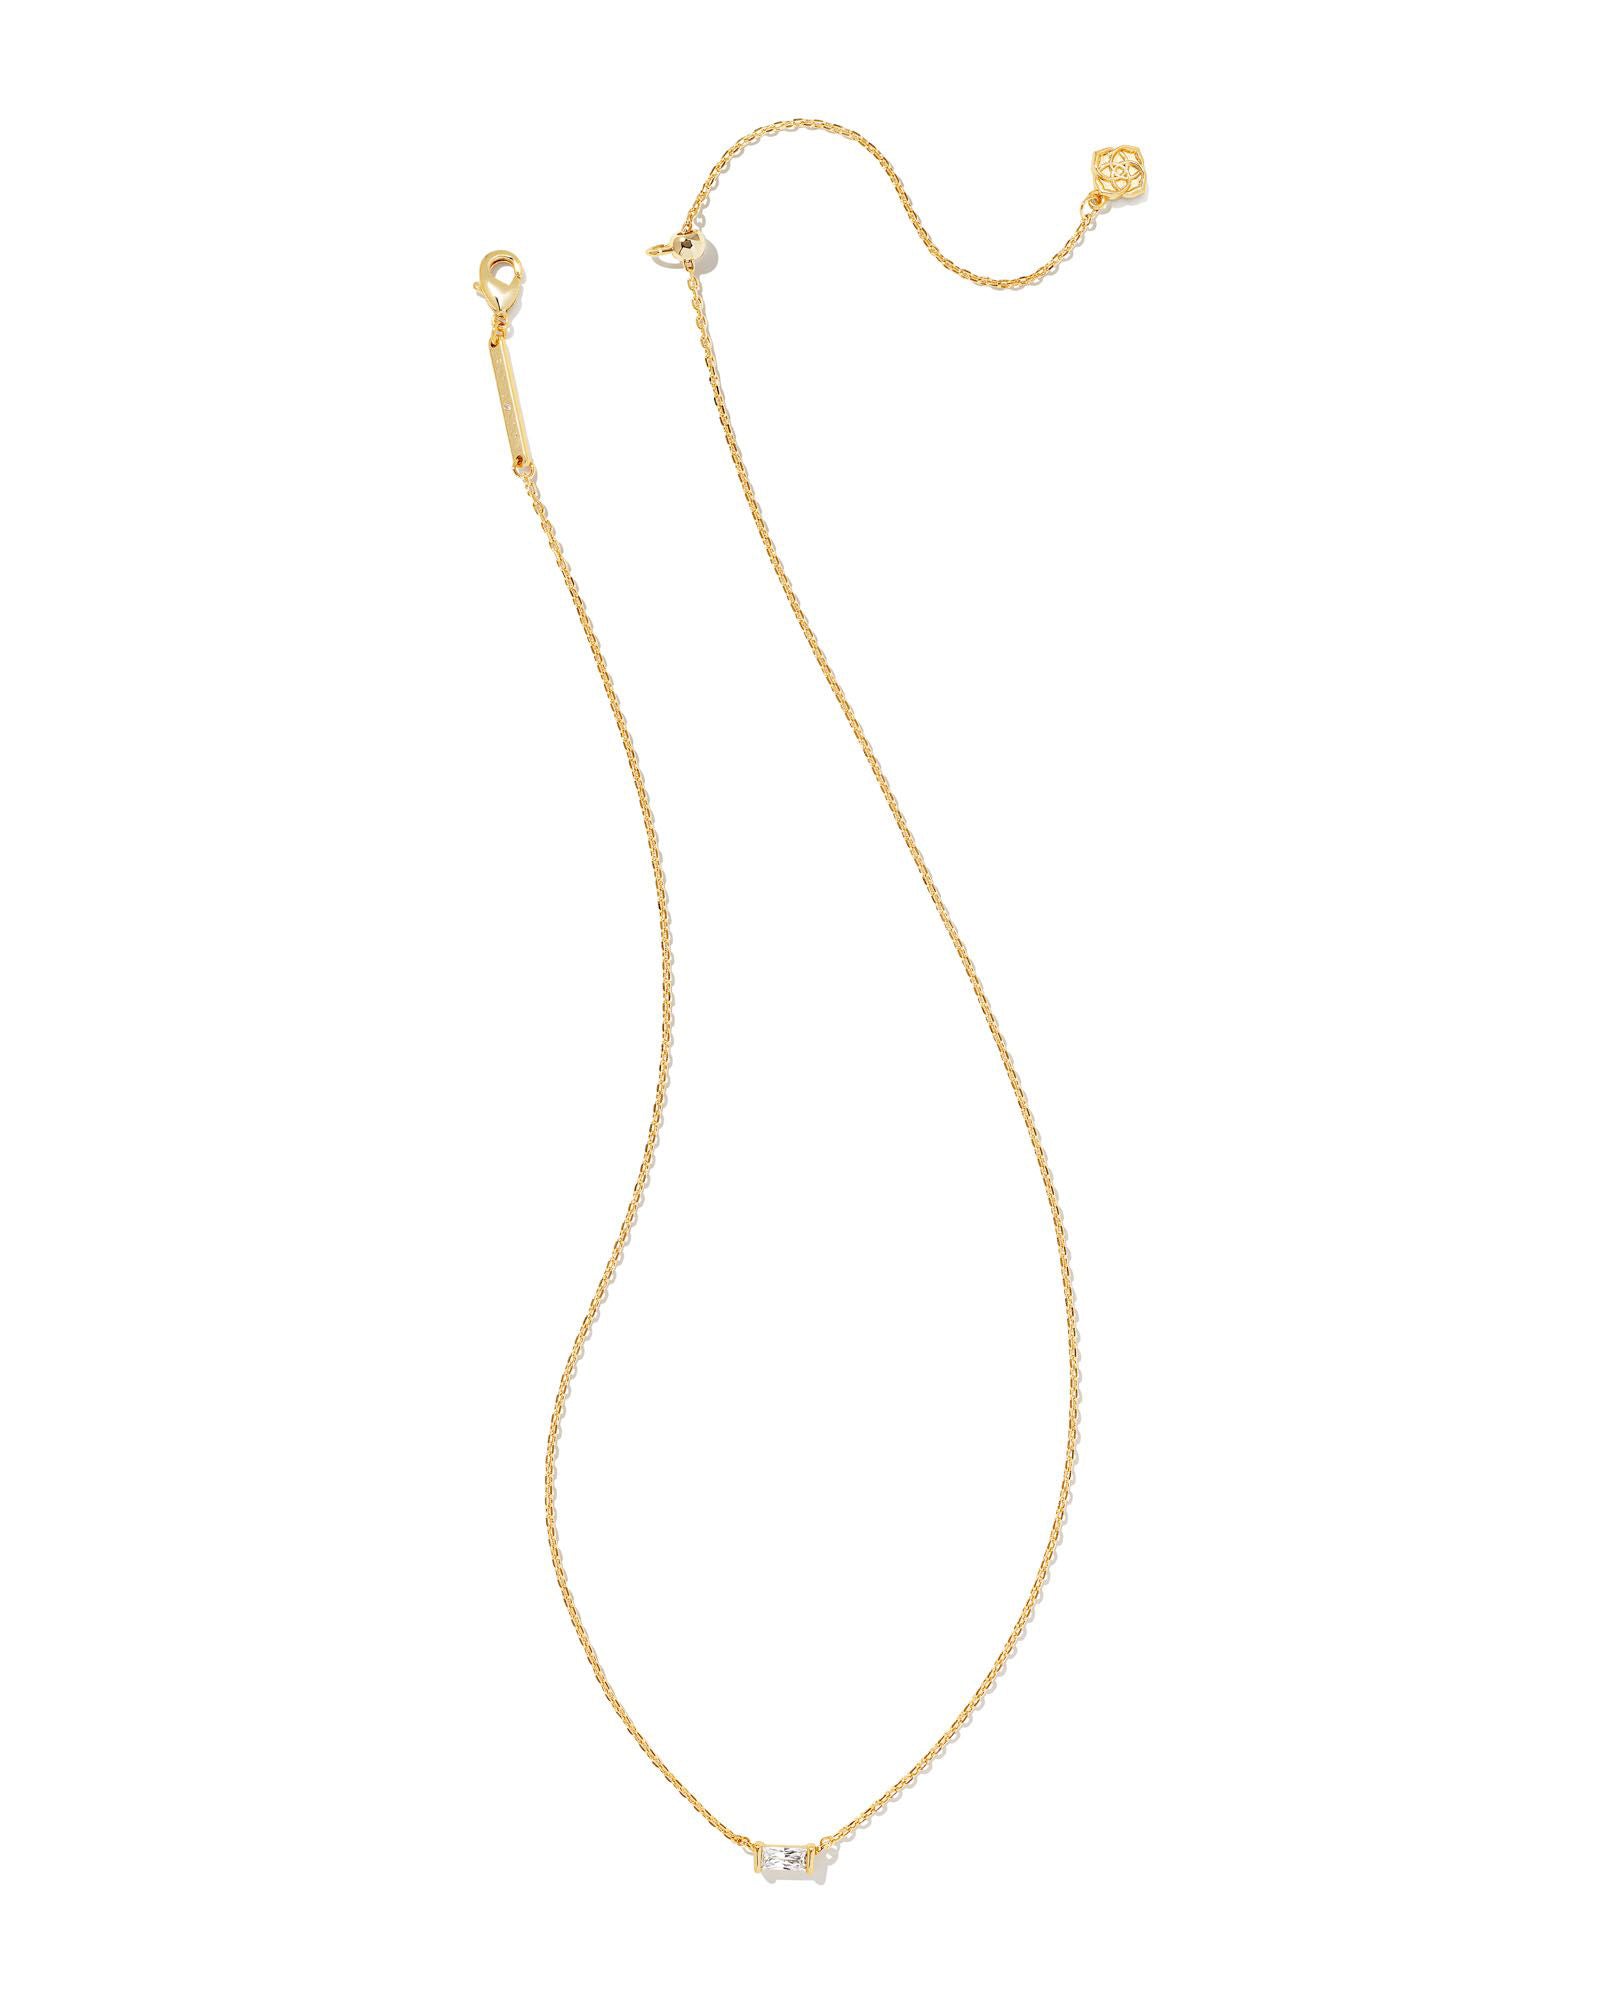 Kendra Scott Juliette Baguette Pendant Necklace in White Crystal and Gold